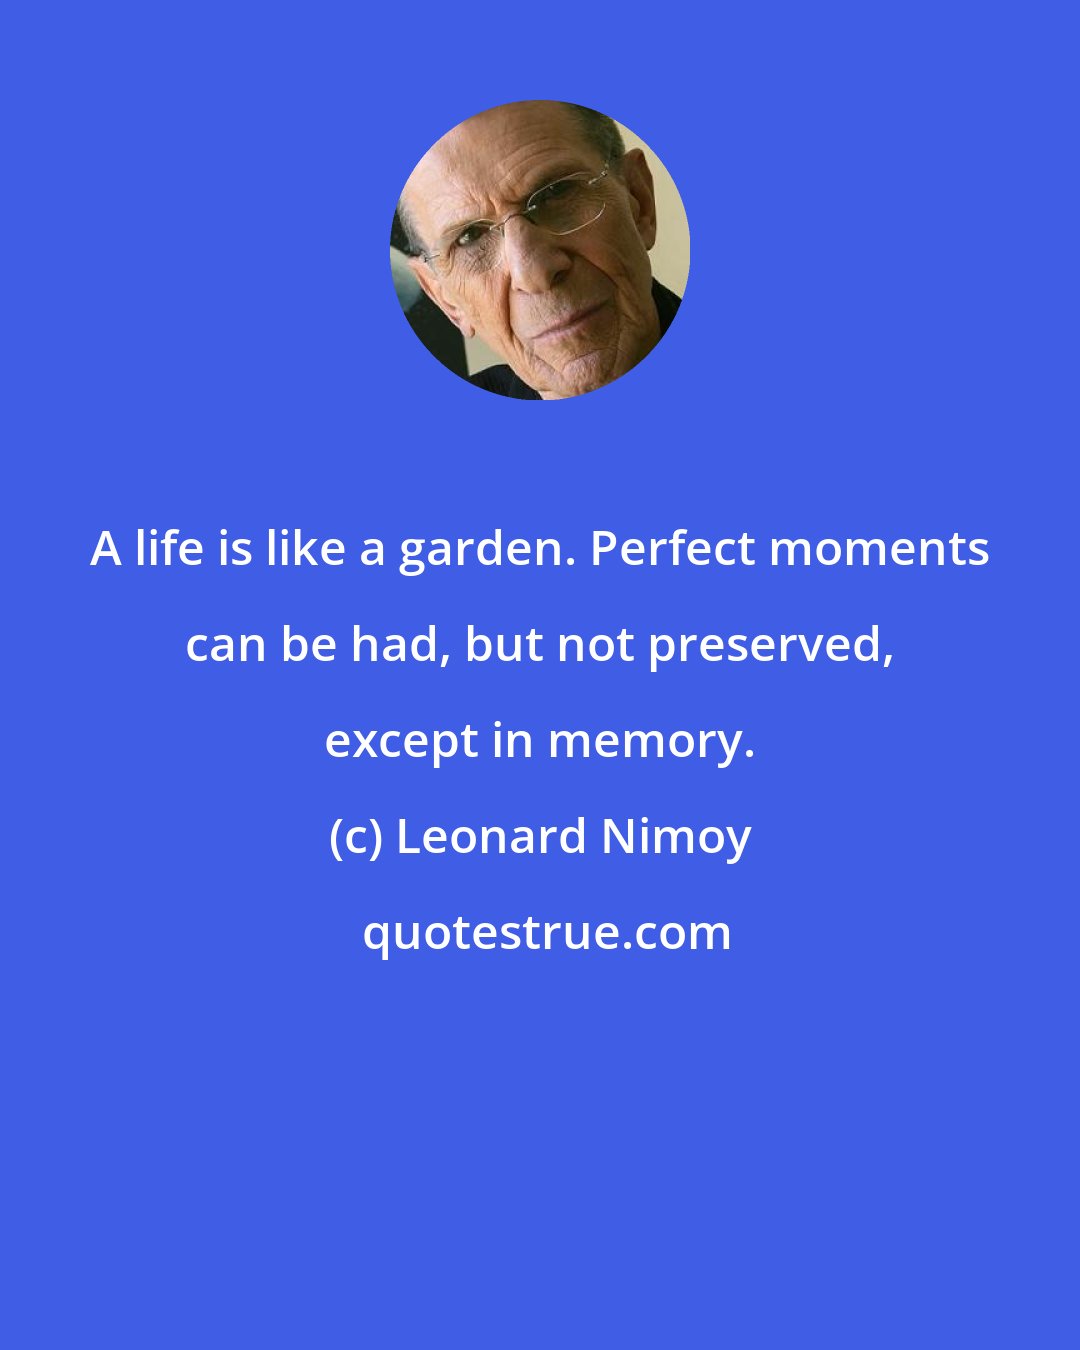 Leonard Nimoy: A life is like a garden. Perfect moments can be had, but not preserved, except in memory.